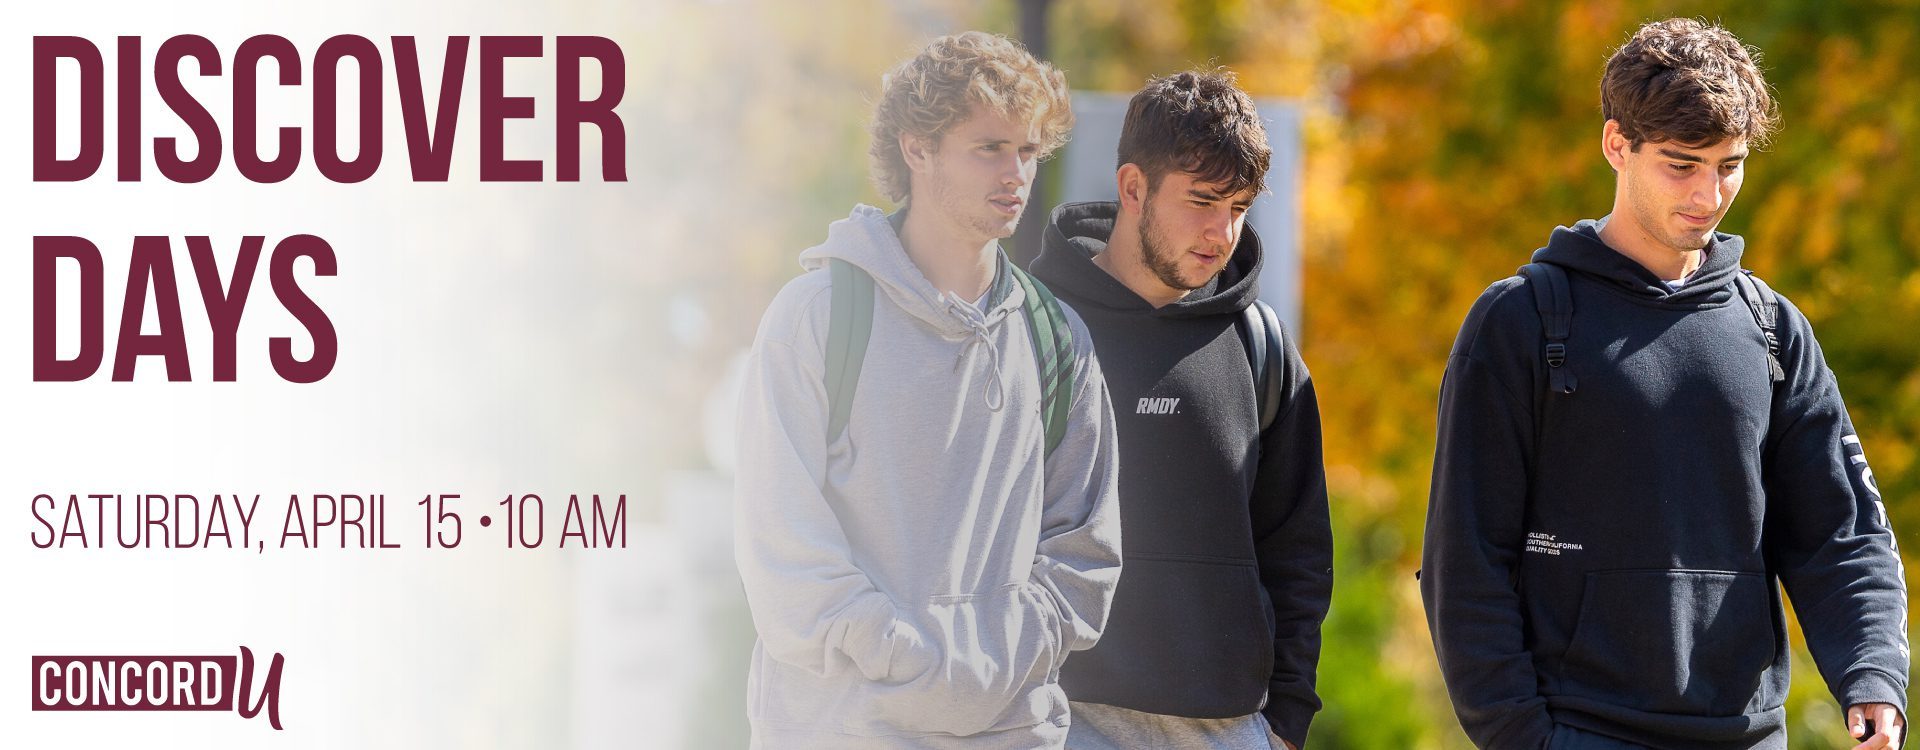 Come to Concord University's Discover Day on Saturday, April 15!